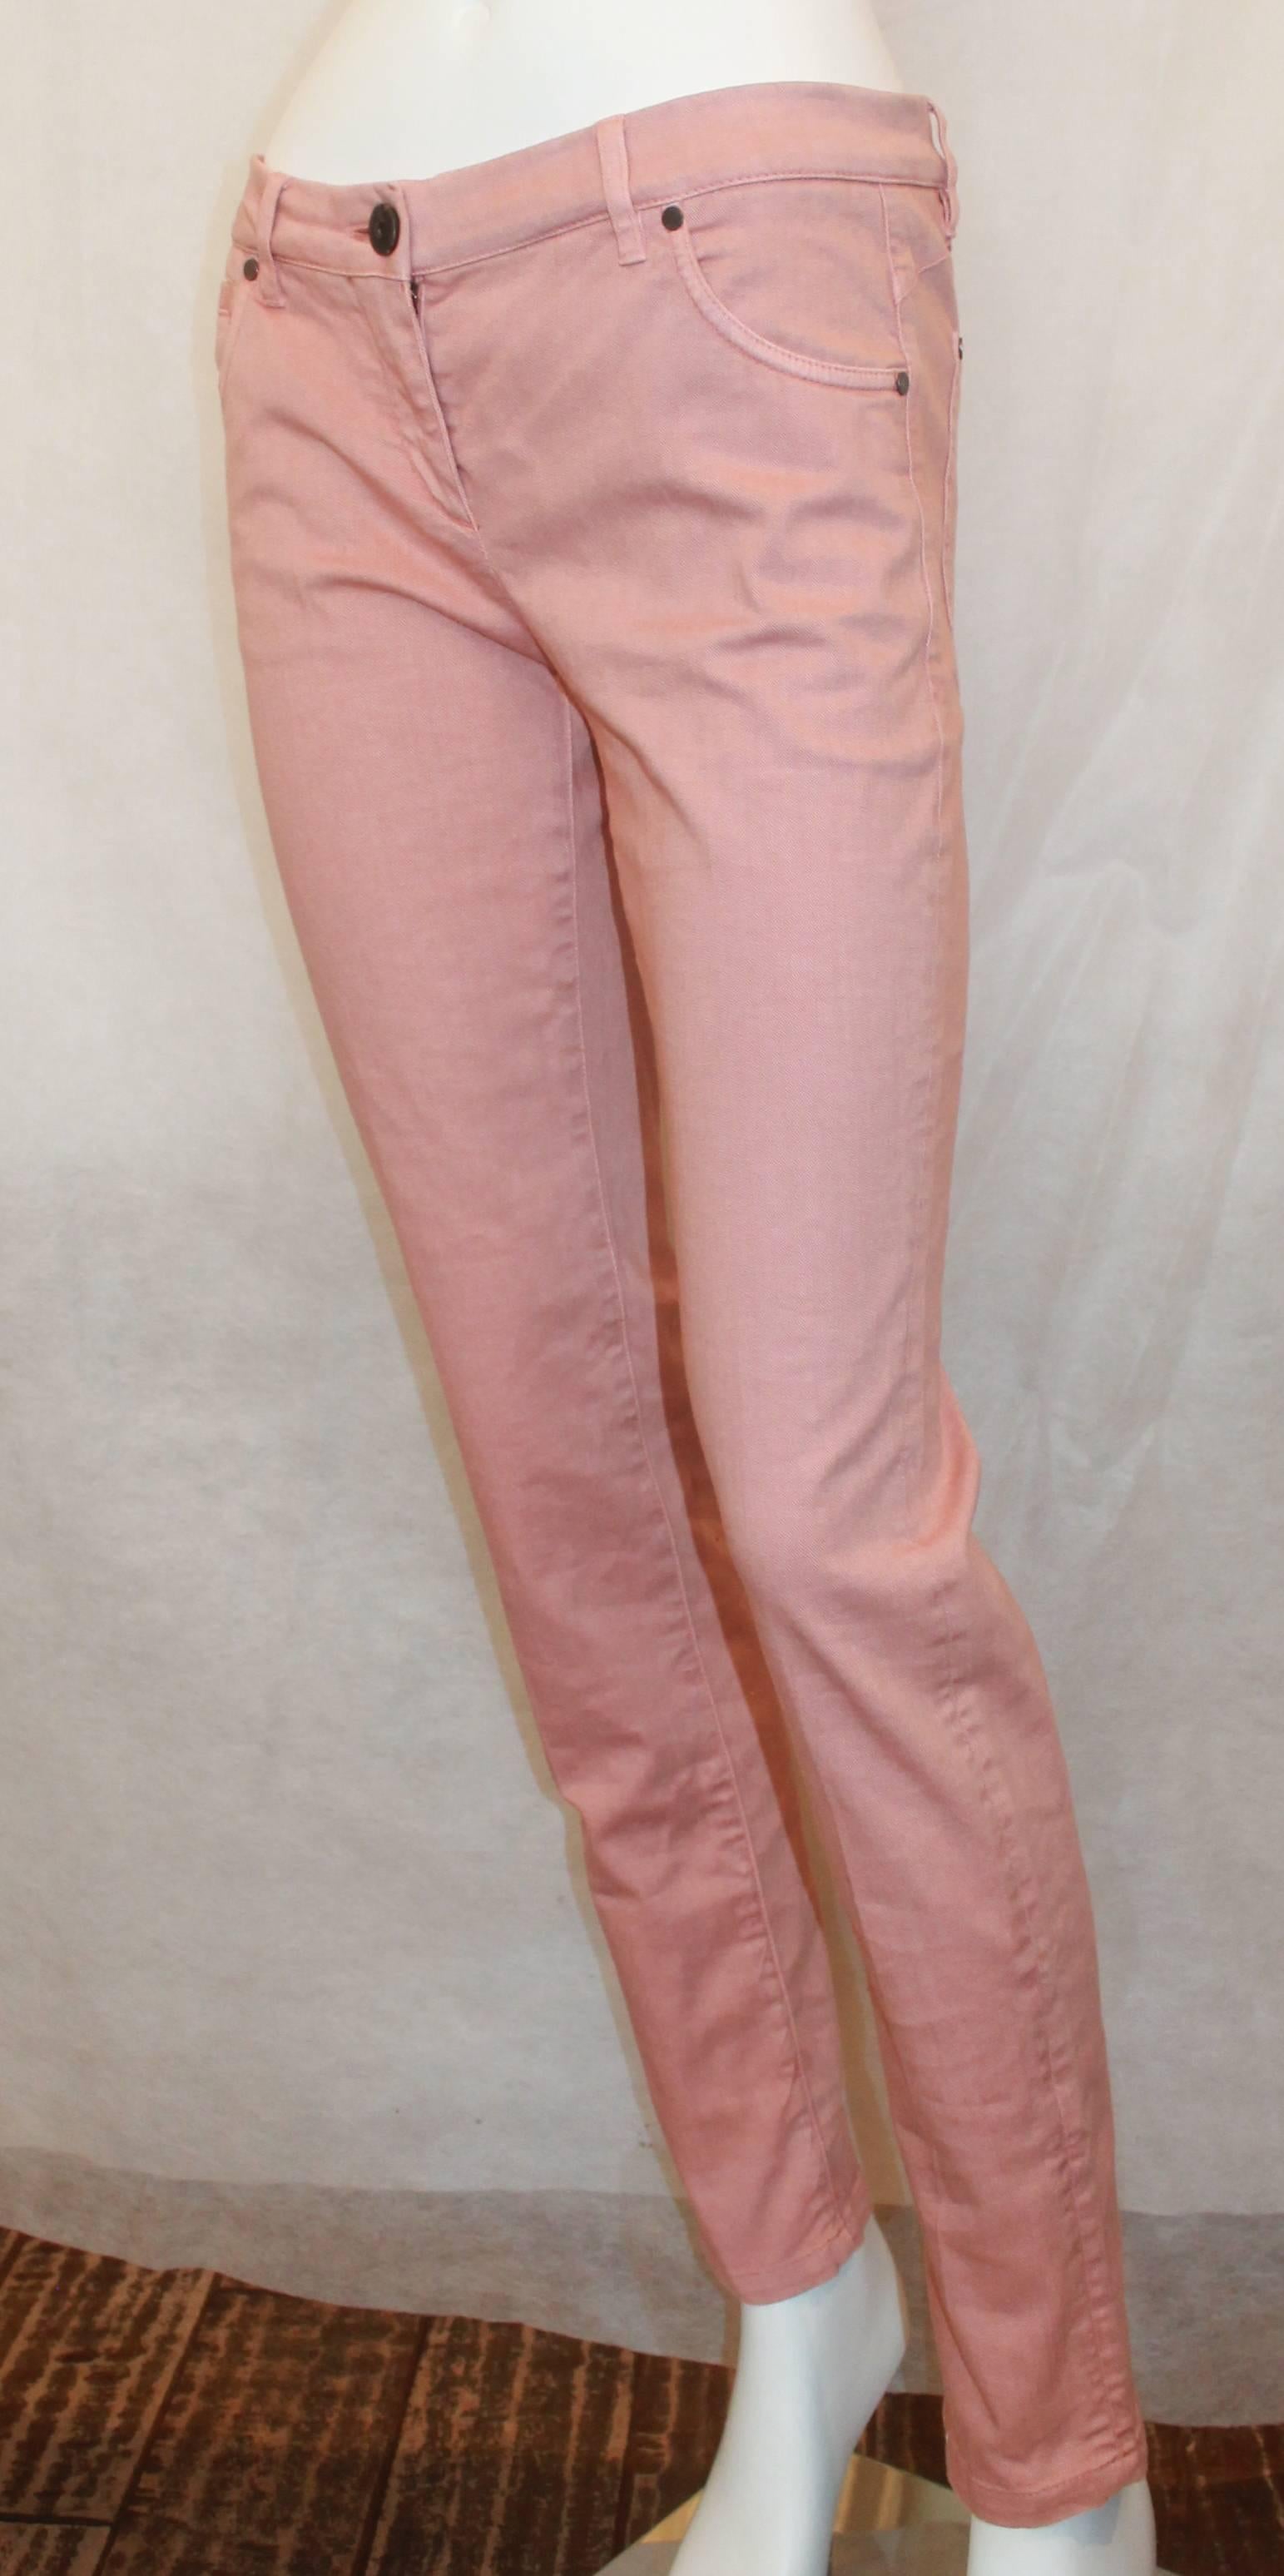 Brunello Cucinelli Blush Cotton Jeans - 6. These fun blush colored jeans add a twist to the normal jean look! There have 5 pockets and are in excellent condition.

Measurements:
Waist: 30